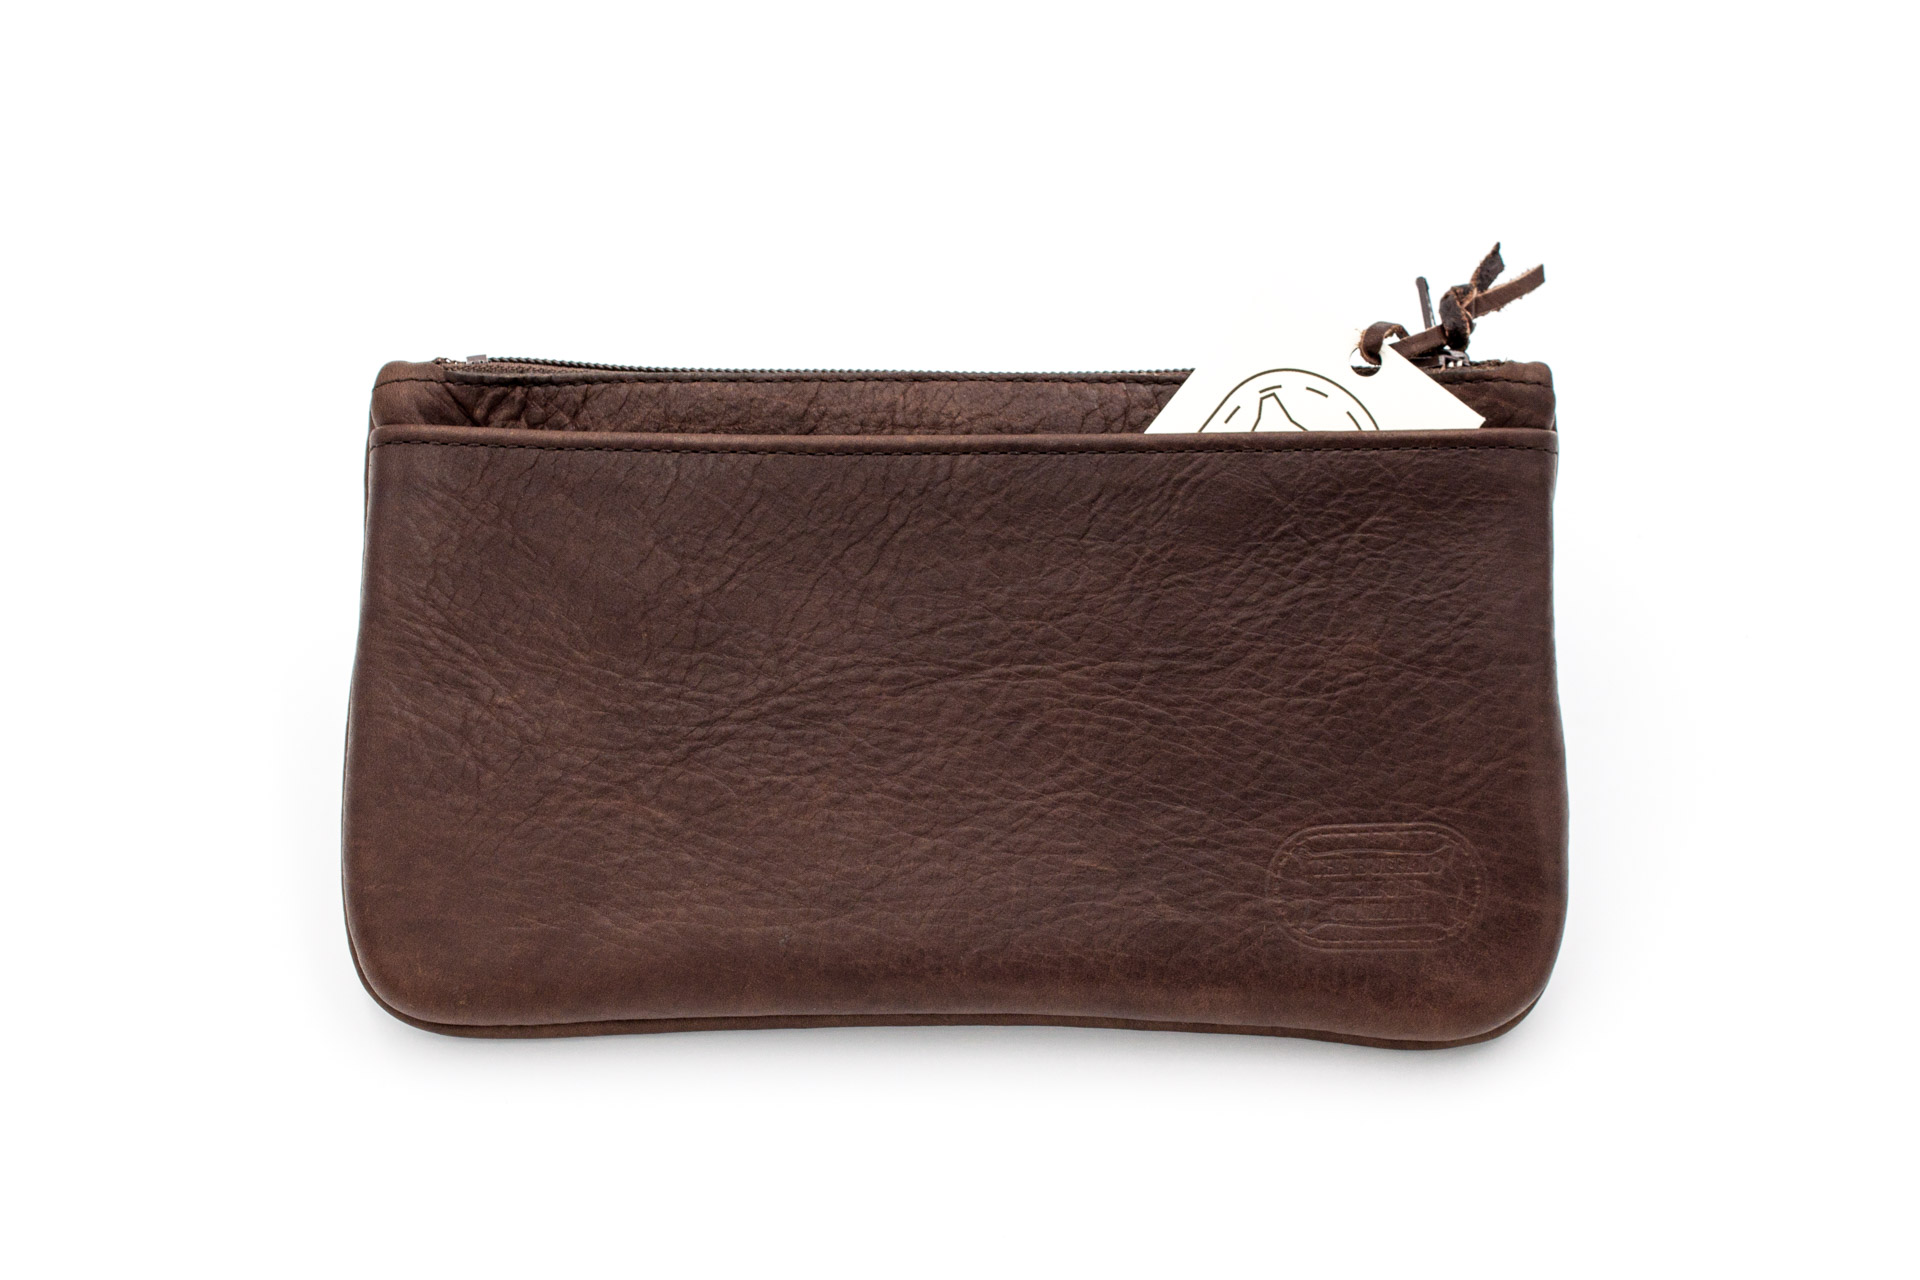 Cholet Zipper Pouch - You just saved $35 in this limited time offer!